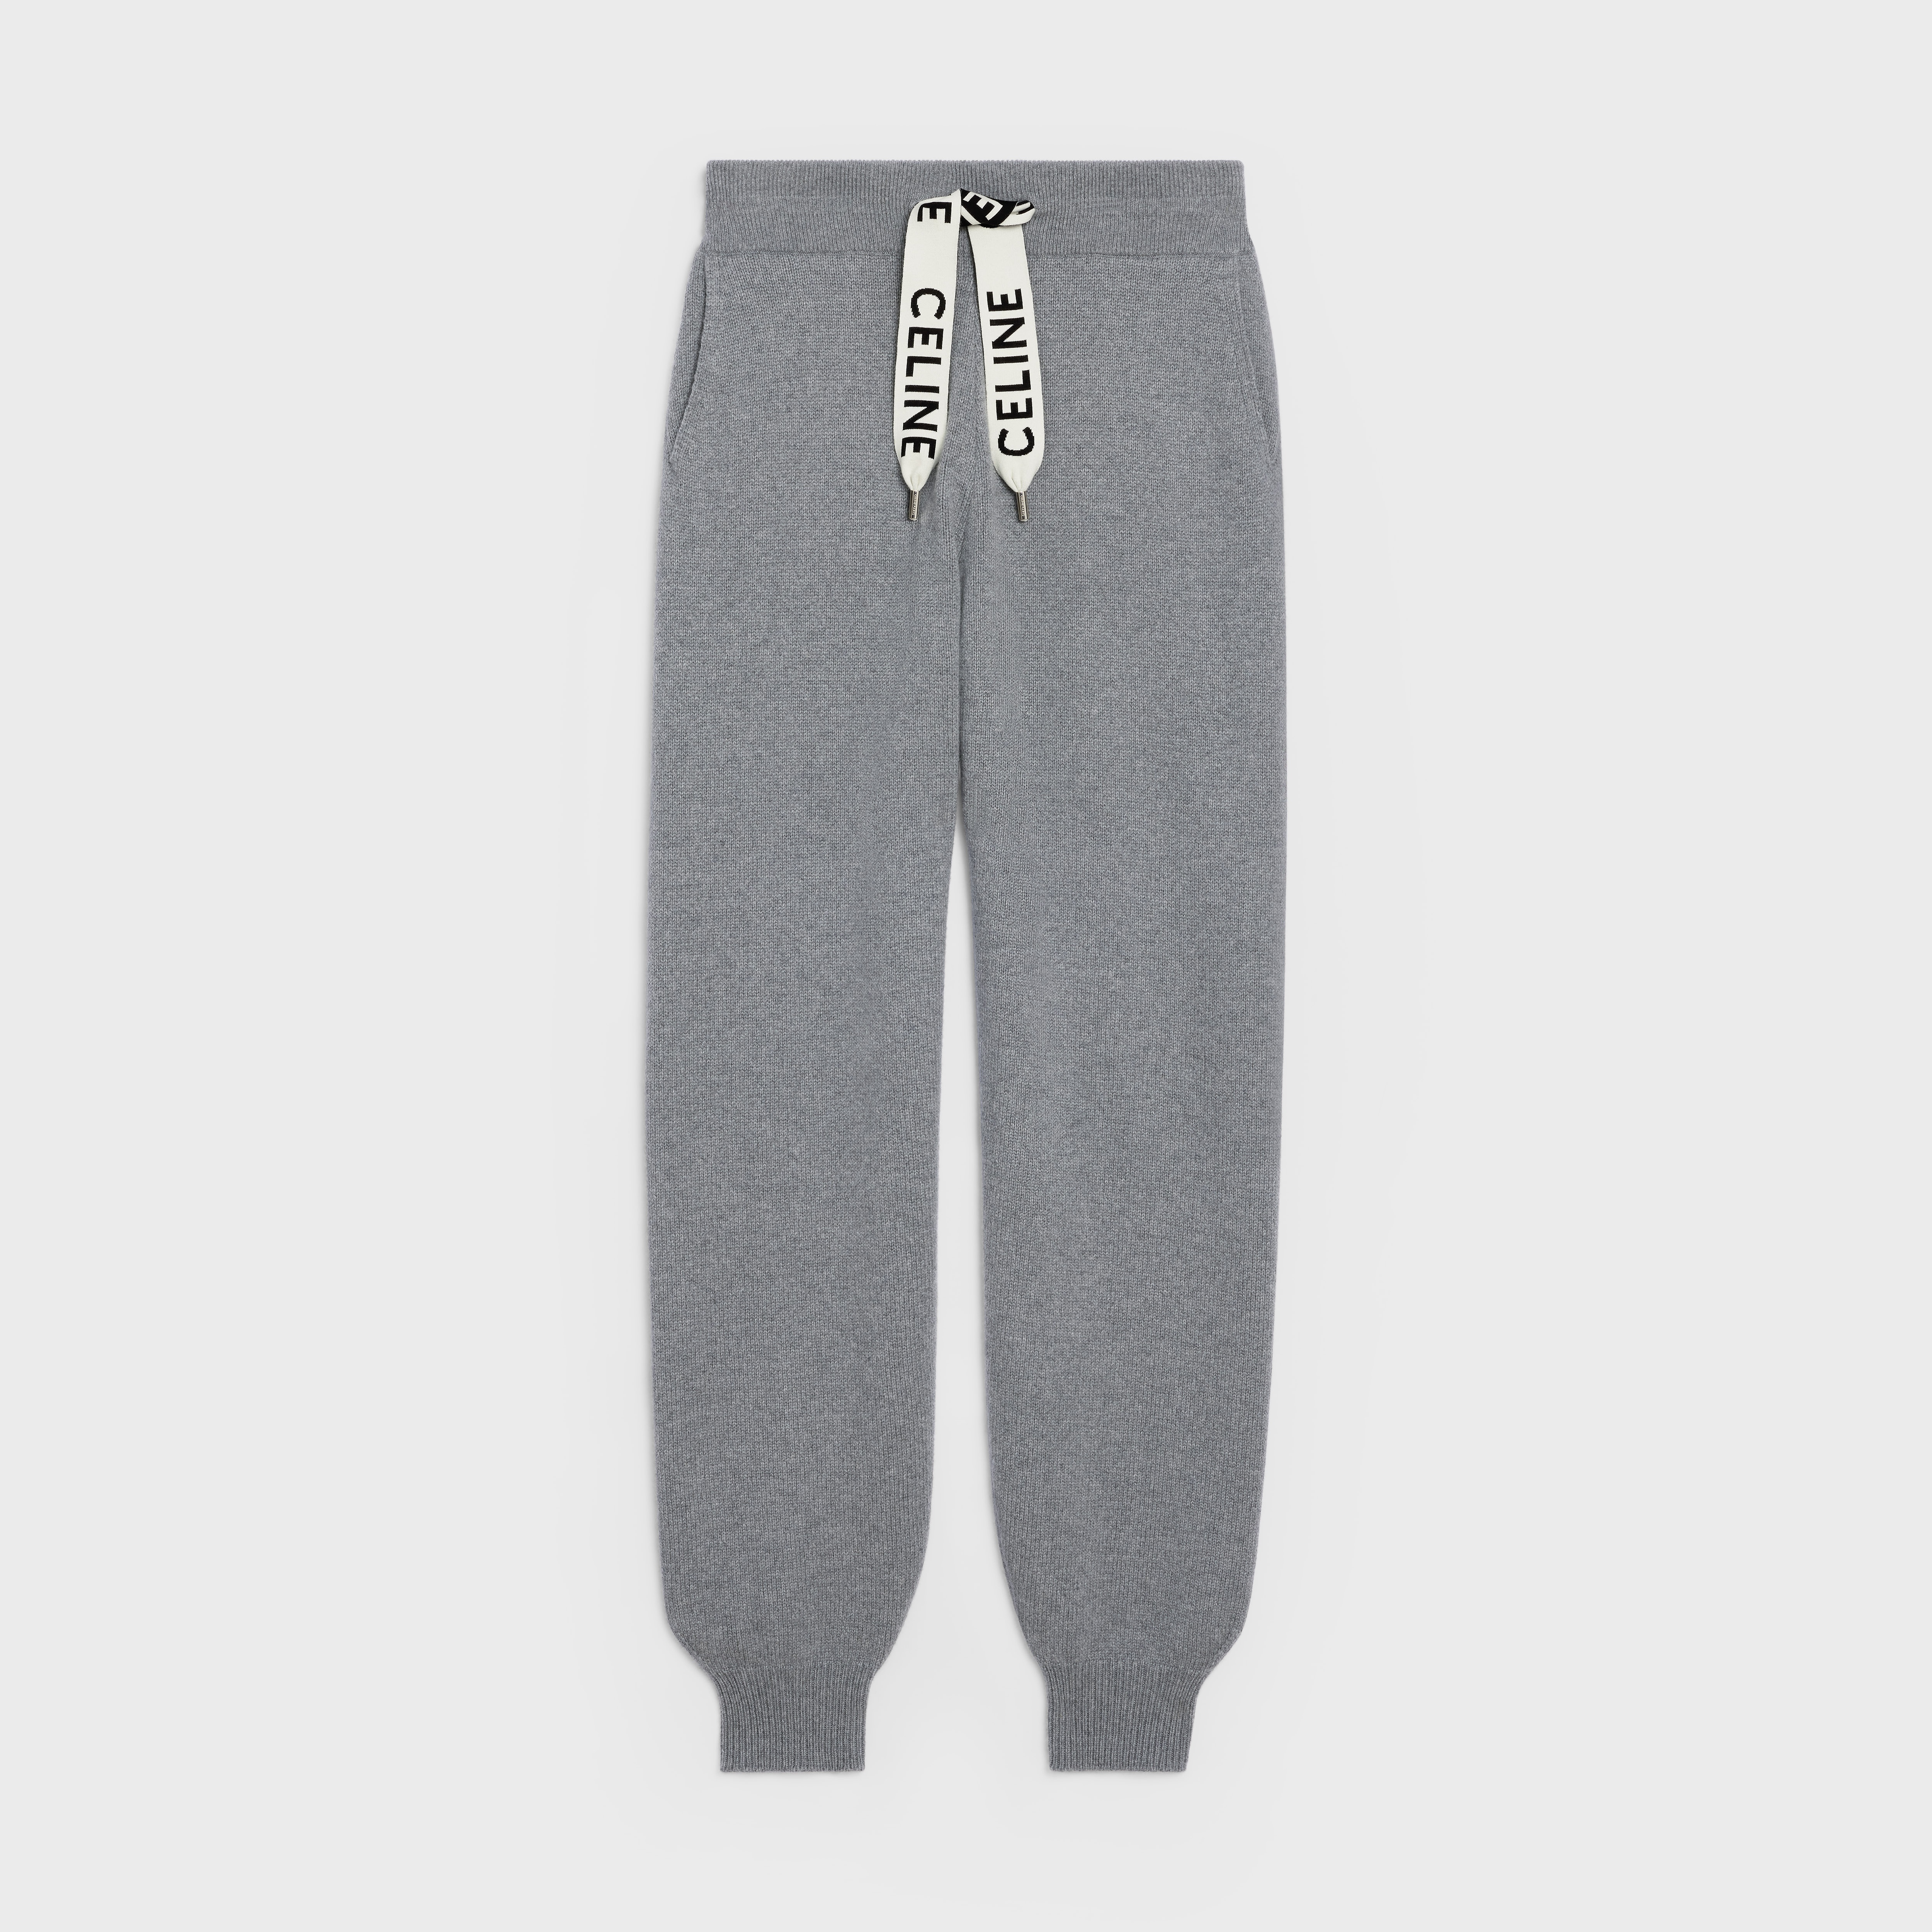 CELINE-EMBROIDERED TRACK PANTS IN COTTON